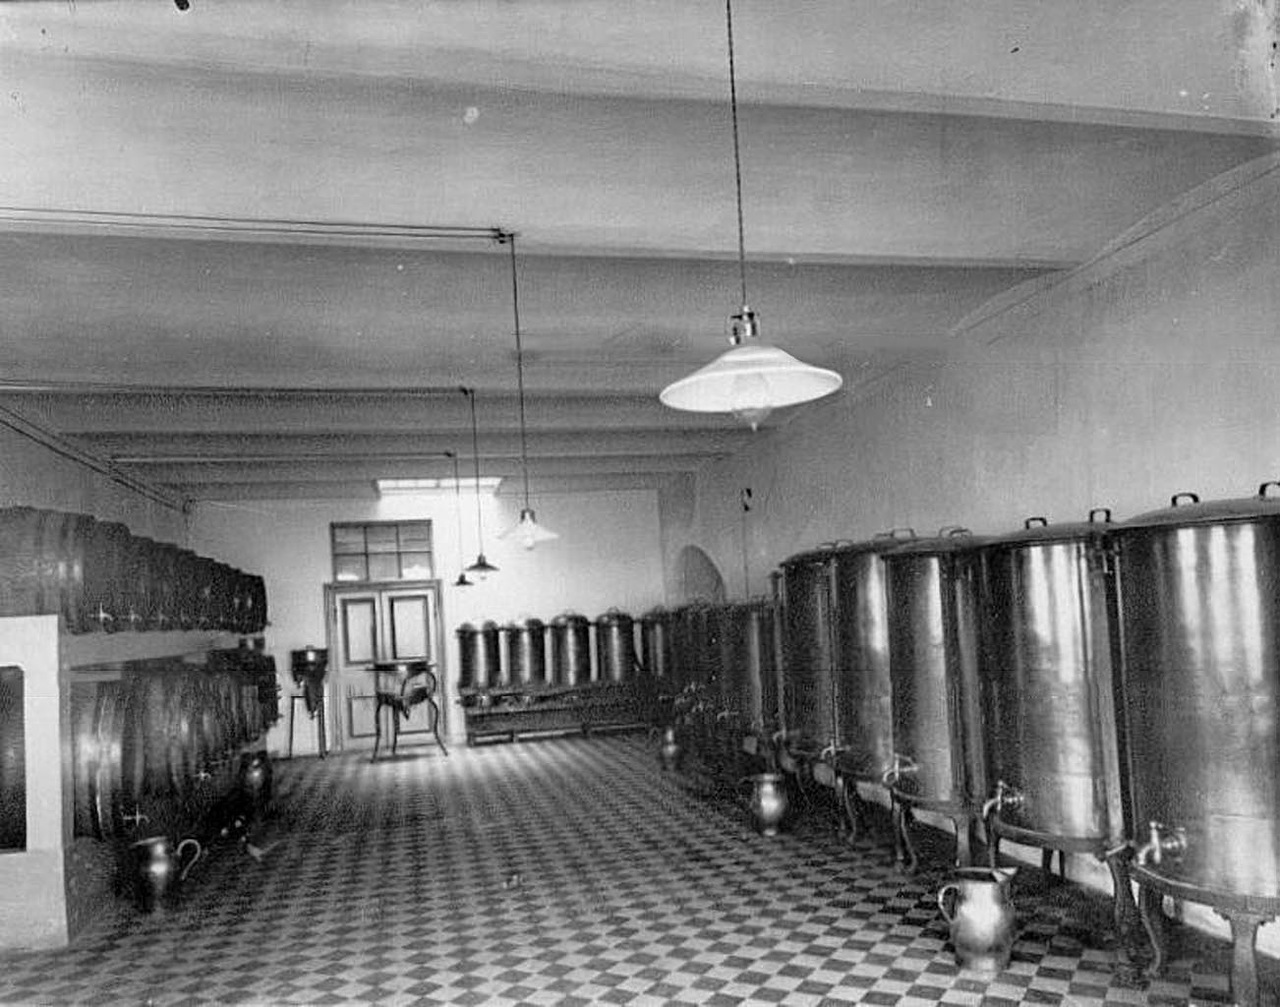 In 1911 Keller and K° was awarded the Gran-Prix at the universal exposition in Turin. After winning many competitions this was to be the company’s last major prize. Ironically this award preceded prohibition laws introduced in Russia at the beginning of World War I. // A wine cellar.